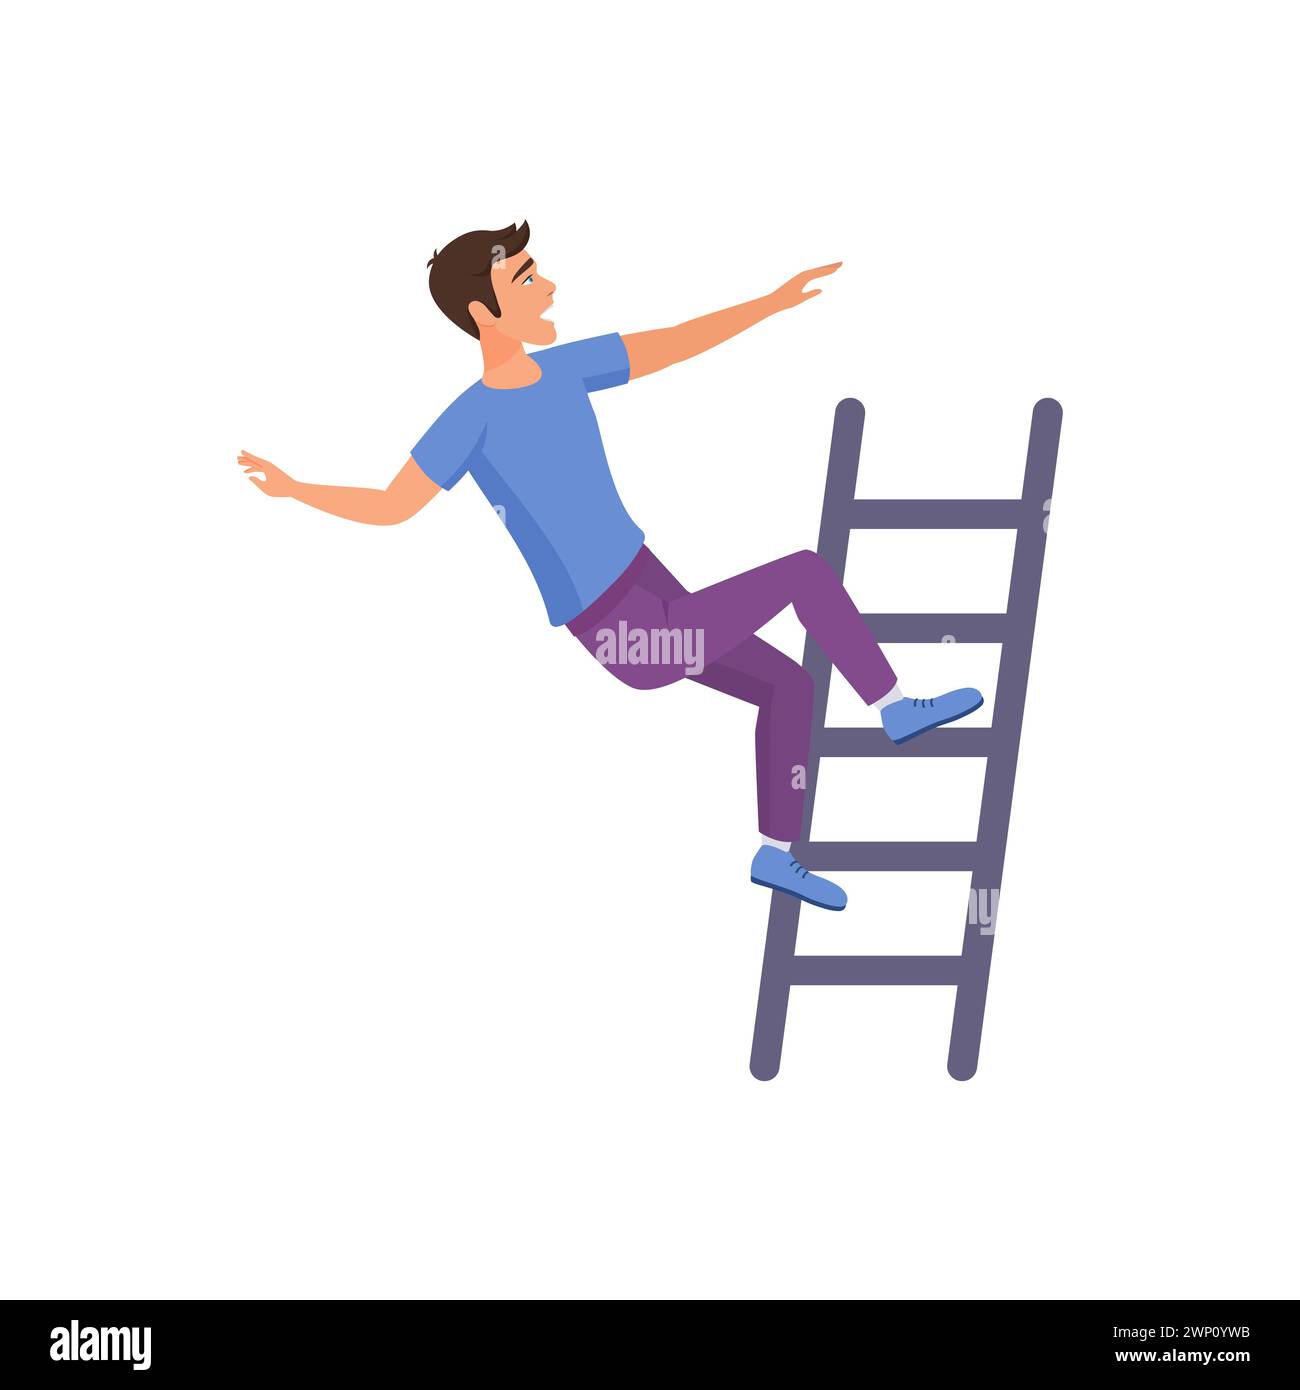 Man flying down, falling from rungs of ladder with risk of injury vector illustration Stock Vector